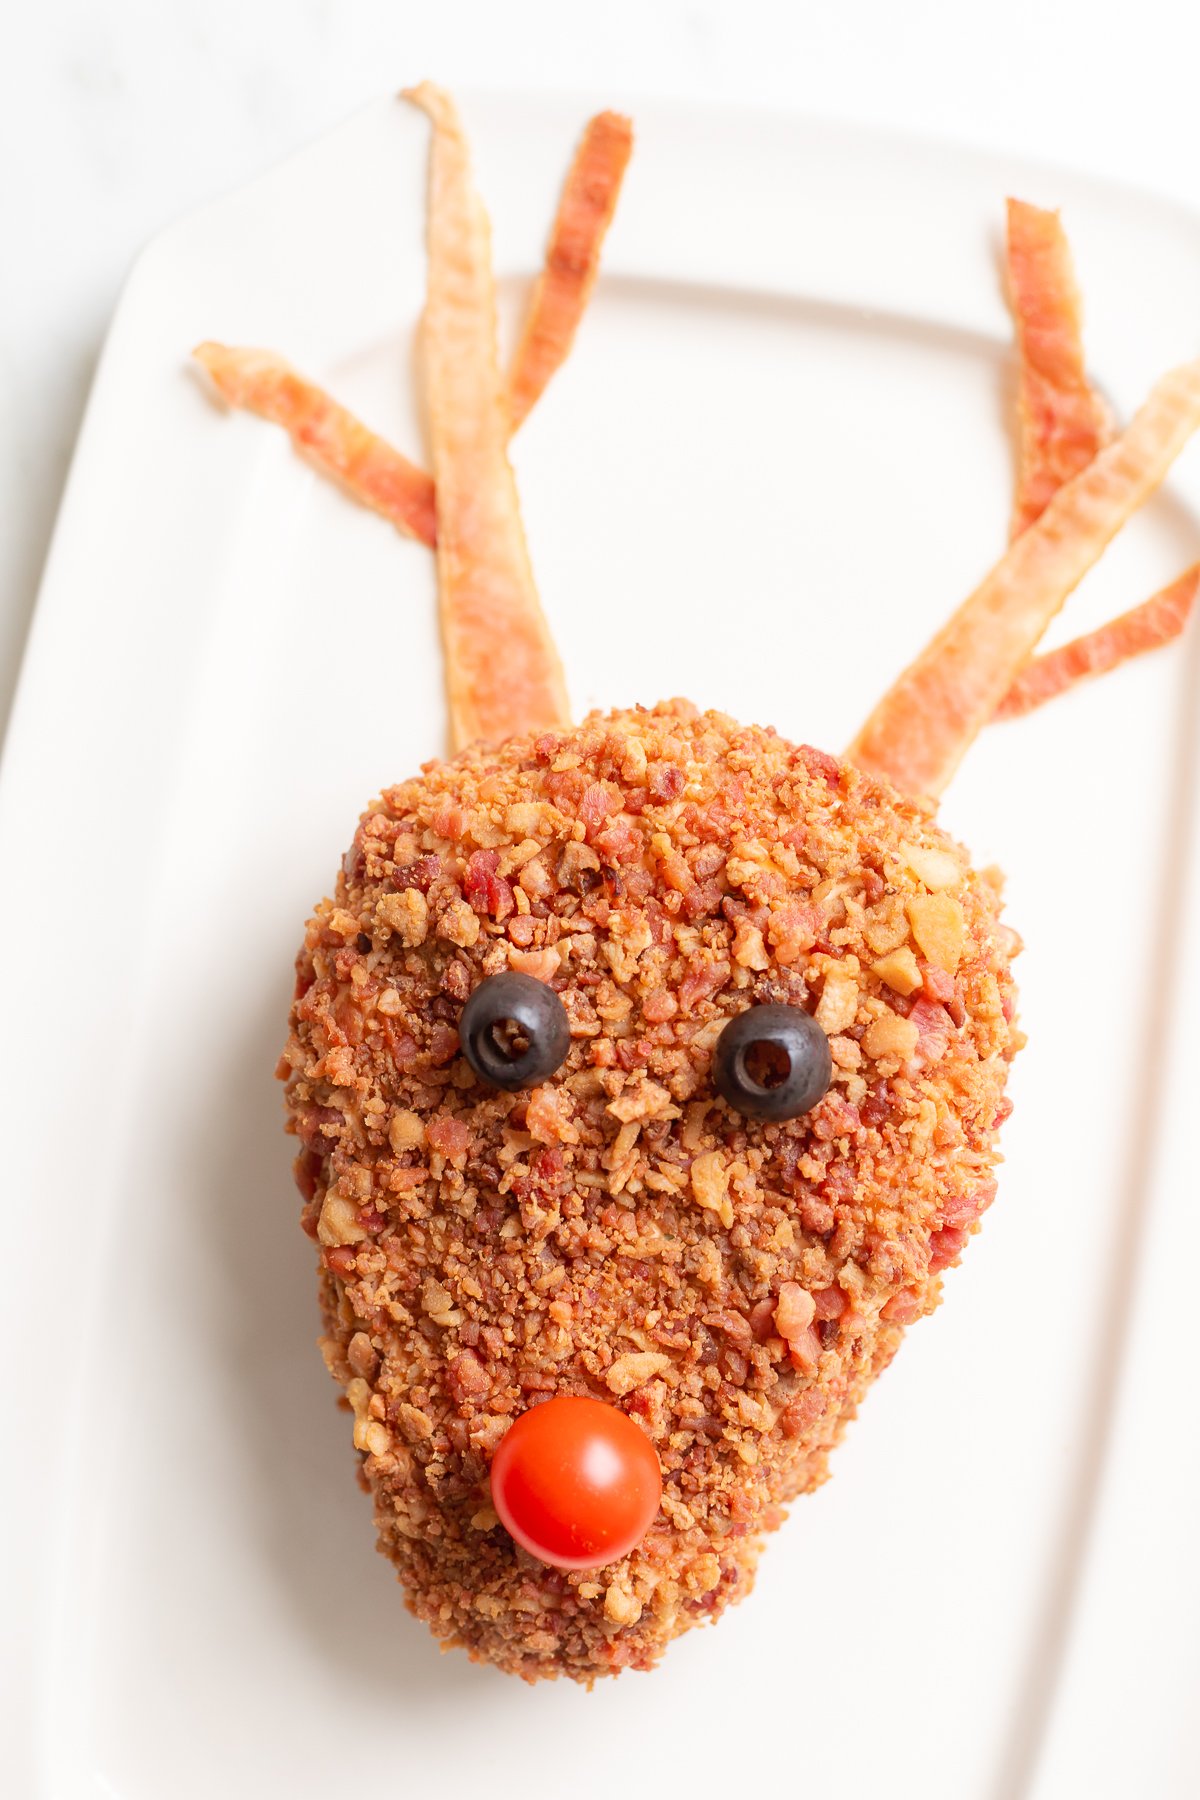 A plate with a bacon covered reindeer cheeseball on it.